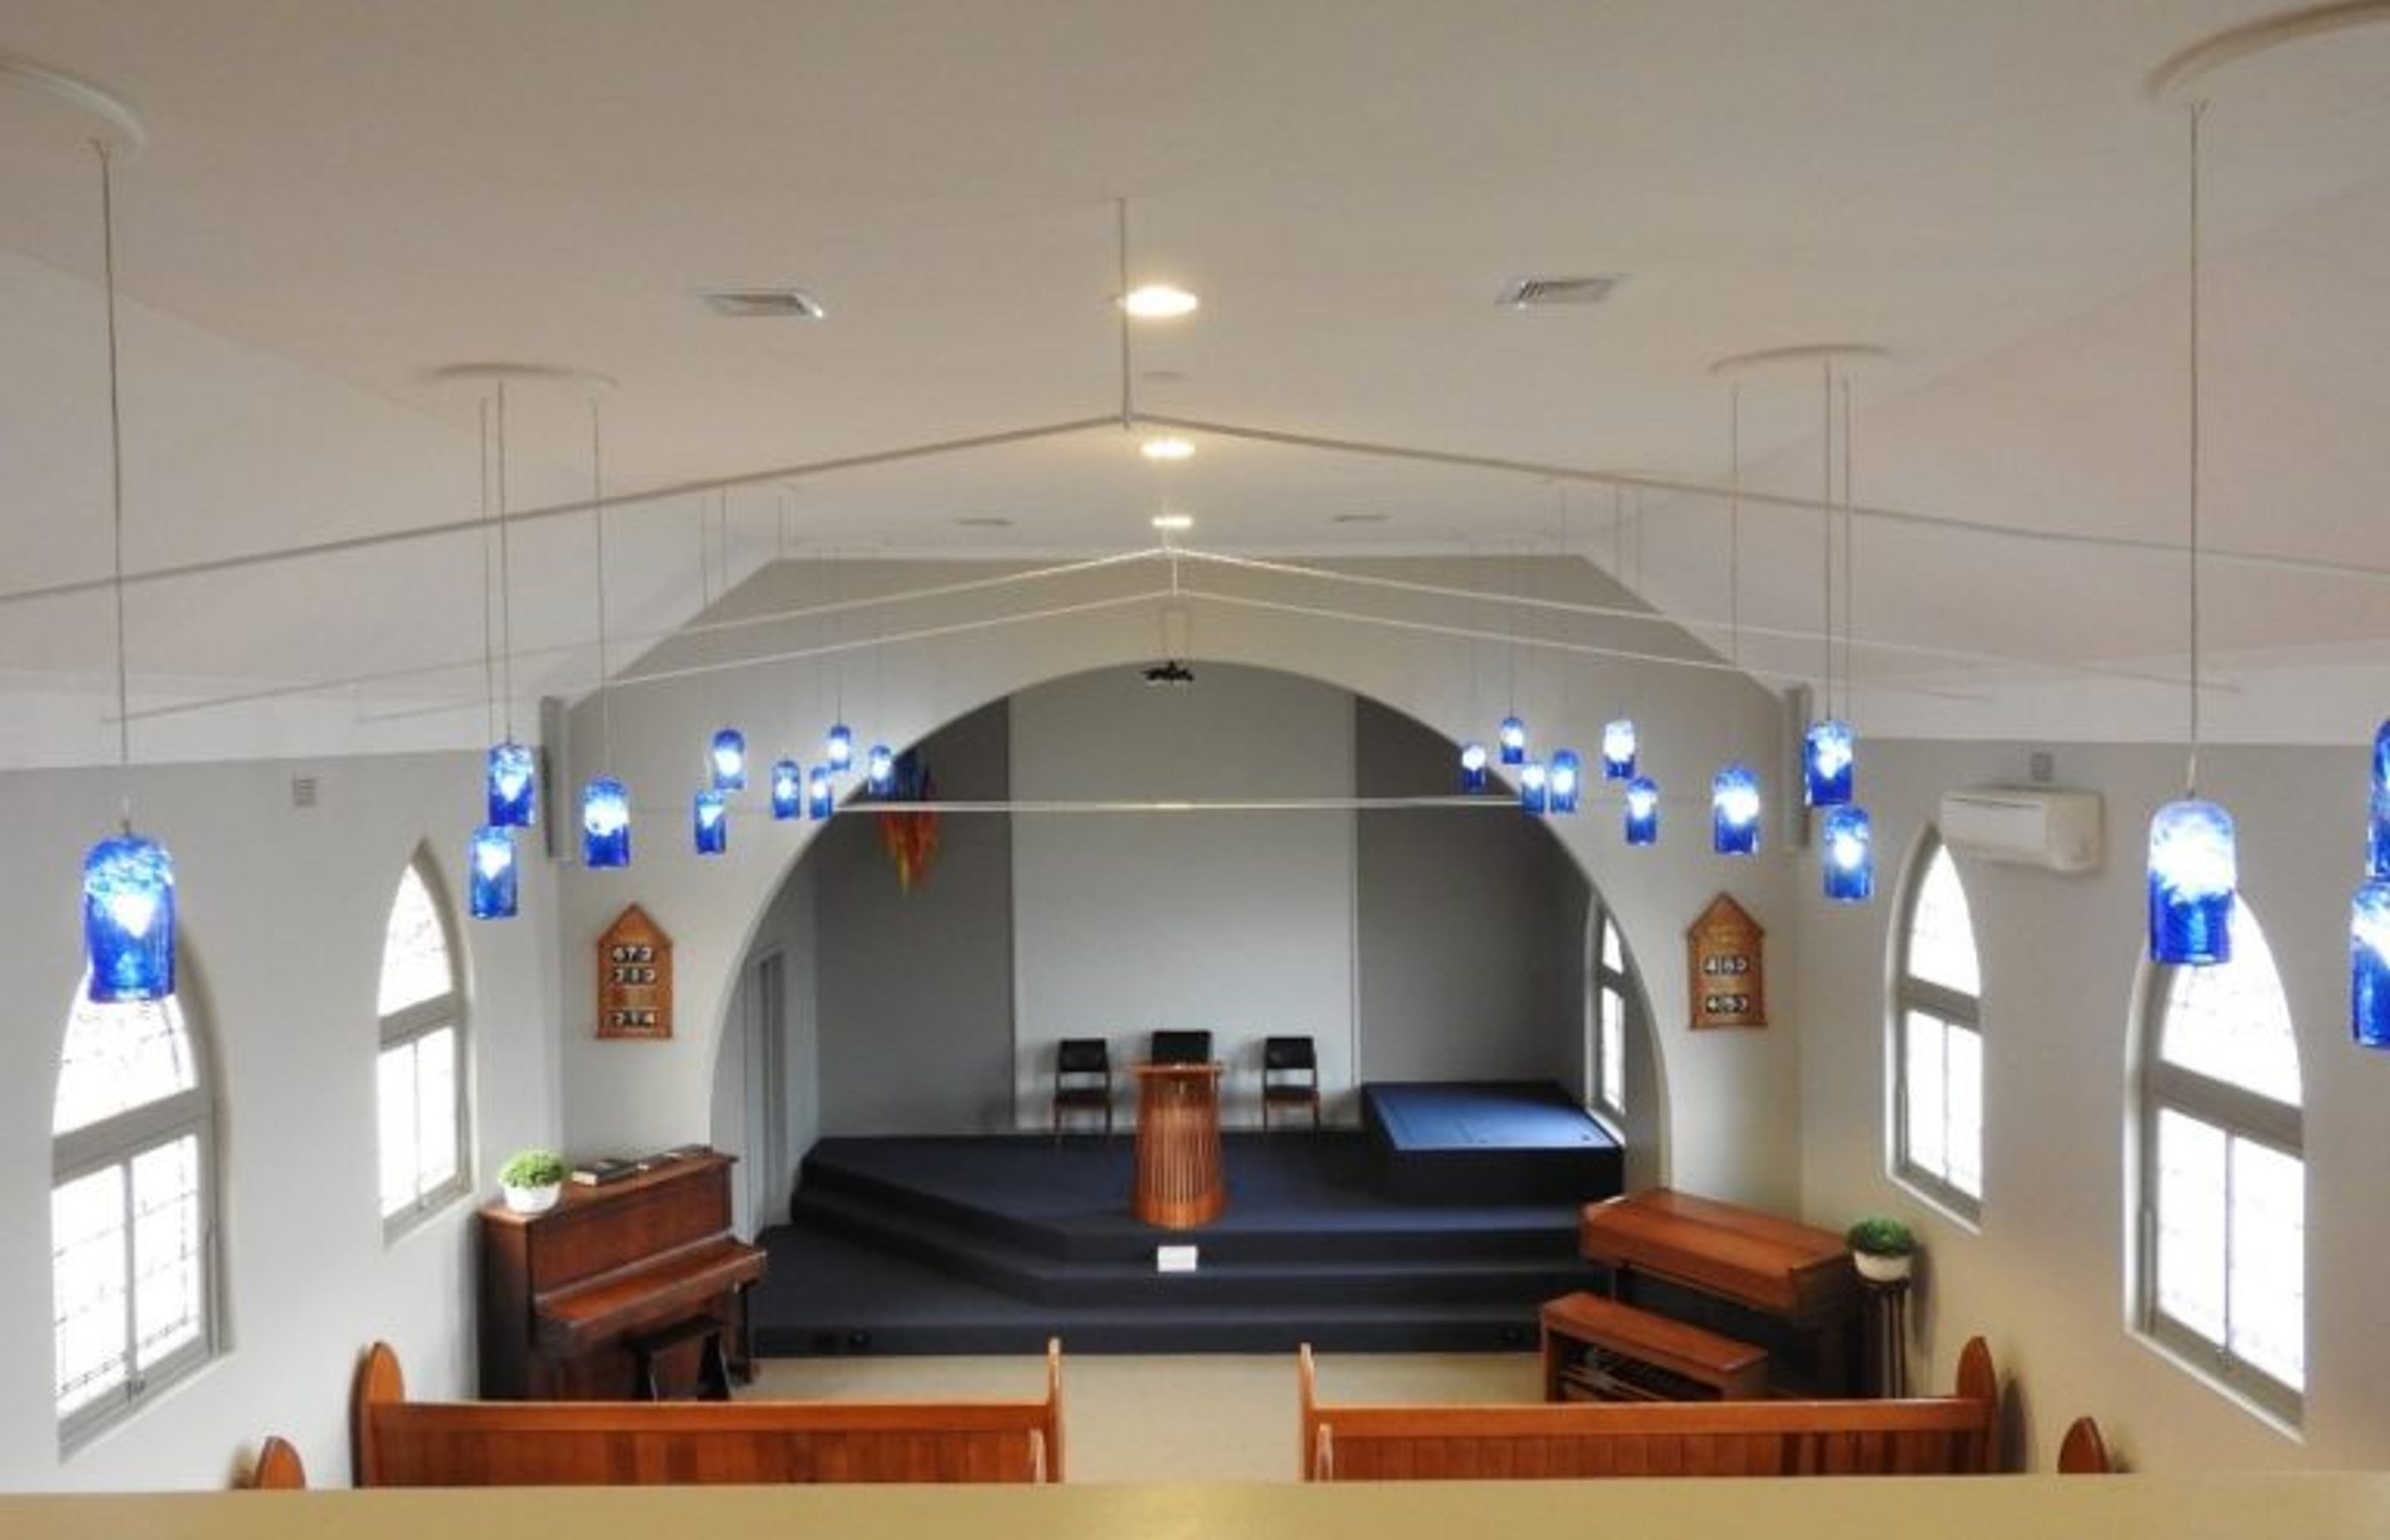 Inspired Spaces Transform a Seventh-Day Adventist Church